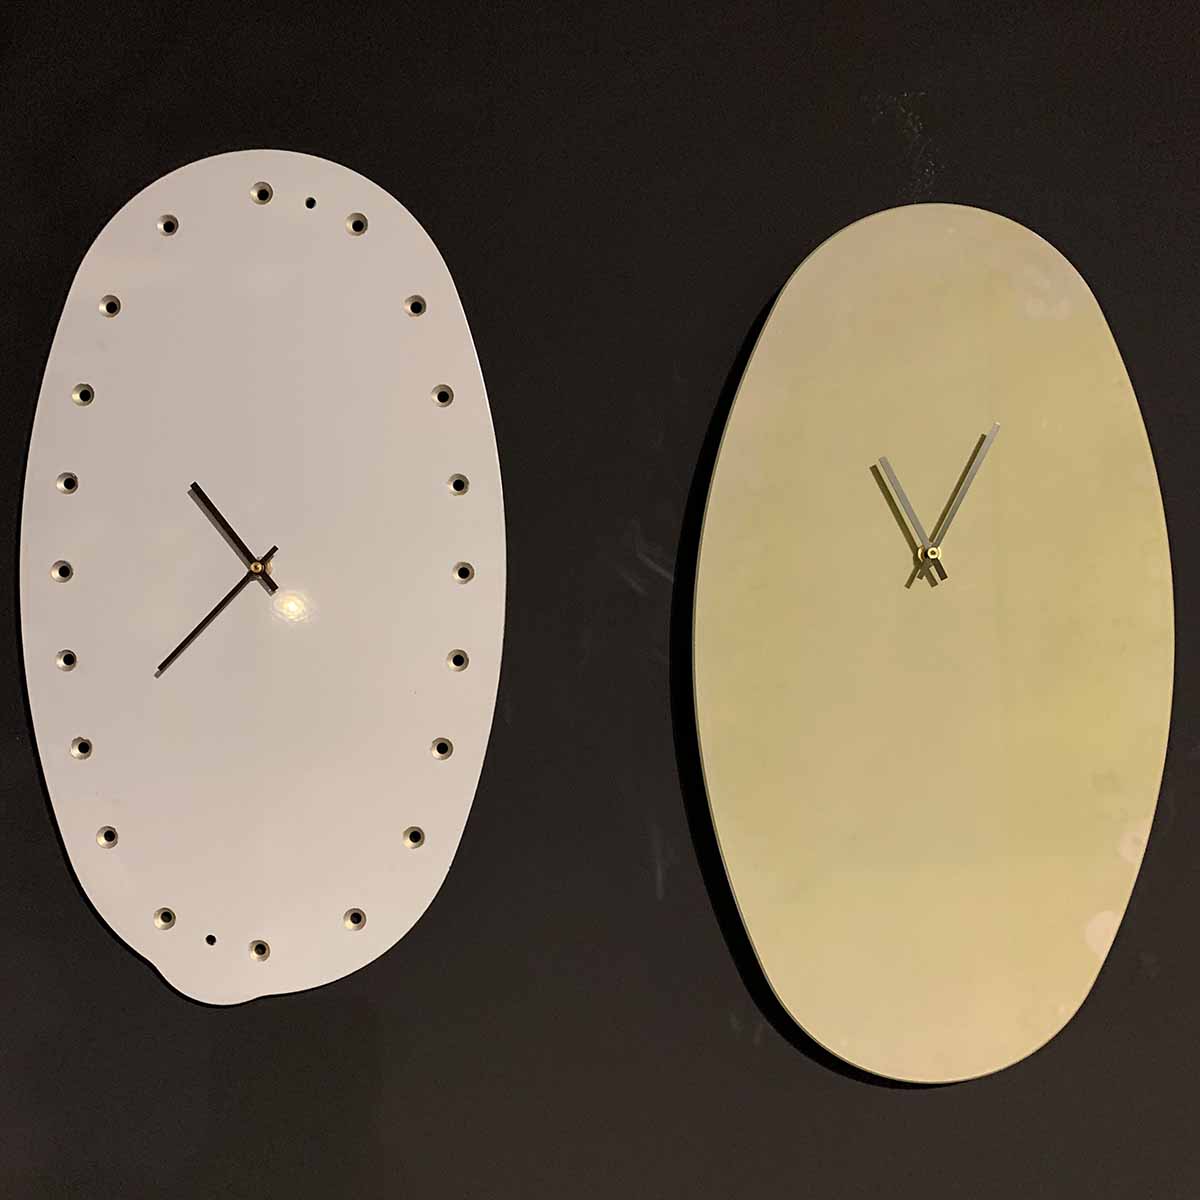 Two British Airways Airbus A318 fuel panel clocks hanging on a black wall.